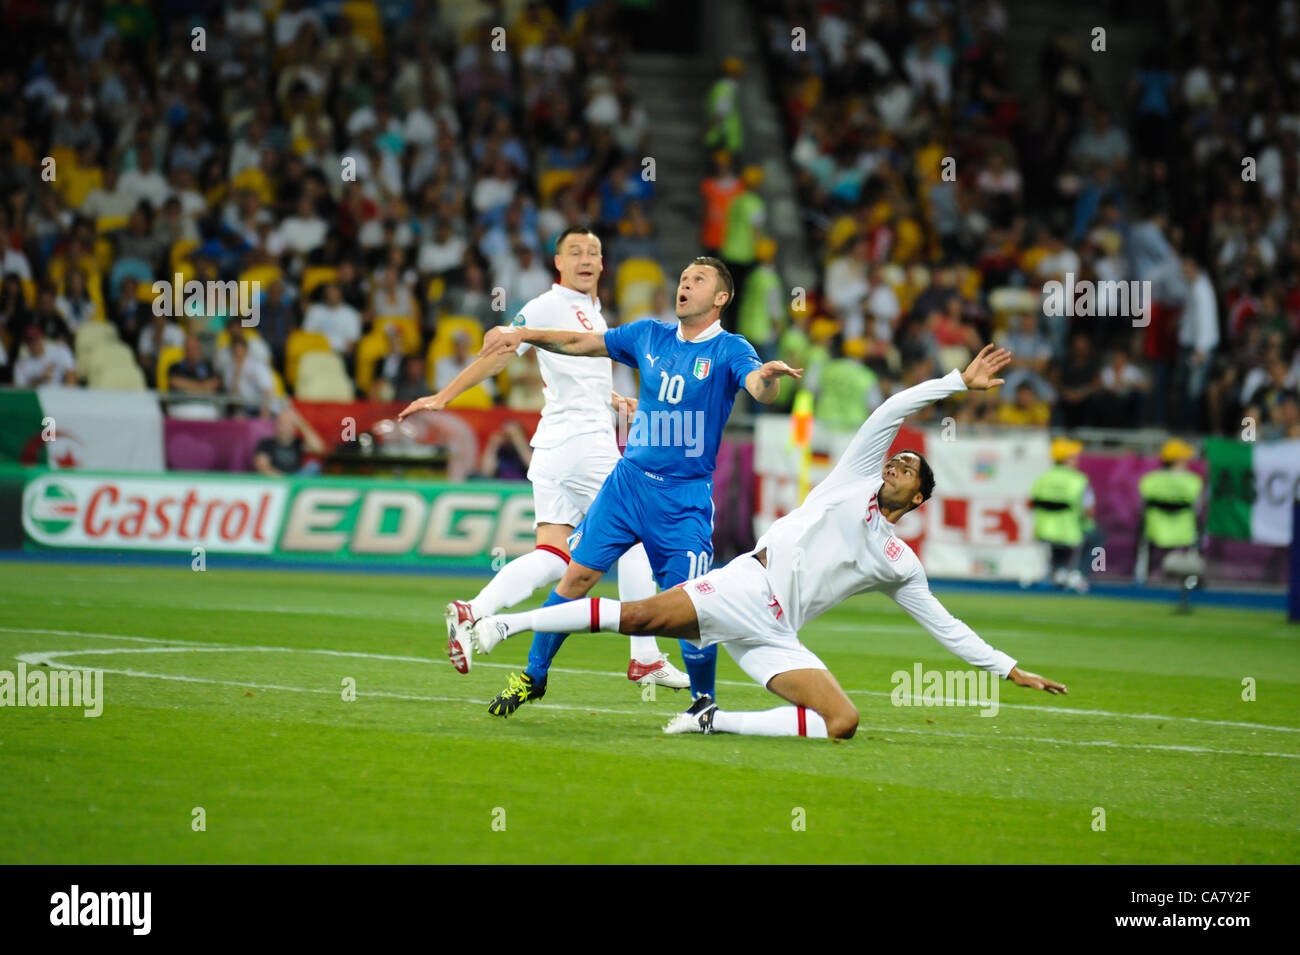 24.06.2012 , Kiev, Ukraine. Antonio Cassano (AC Milan) in action for Italy during the European Championship Quarter Final game between England and Italy at the Olympic Stadium, Kiev. Stock Photo